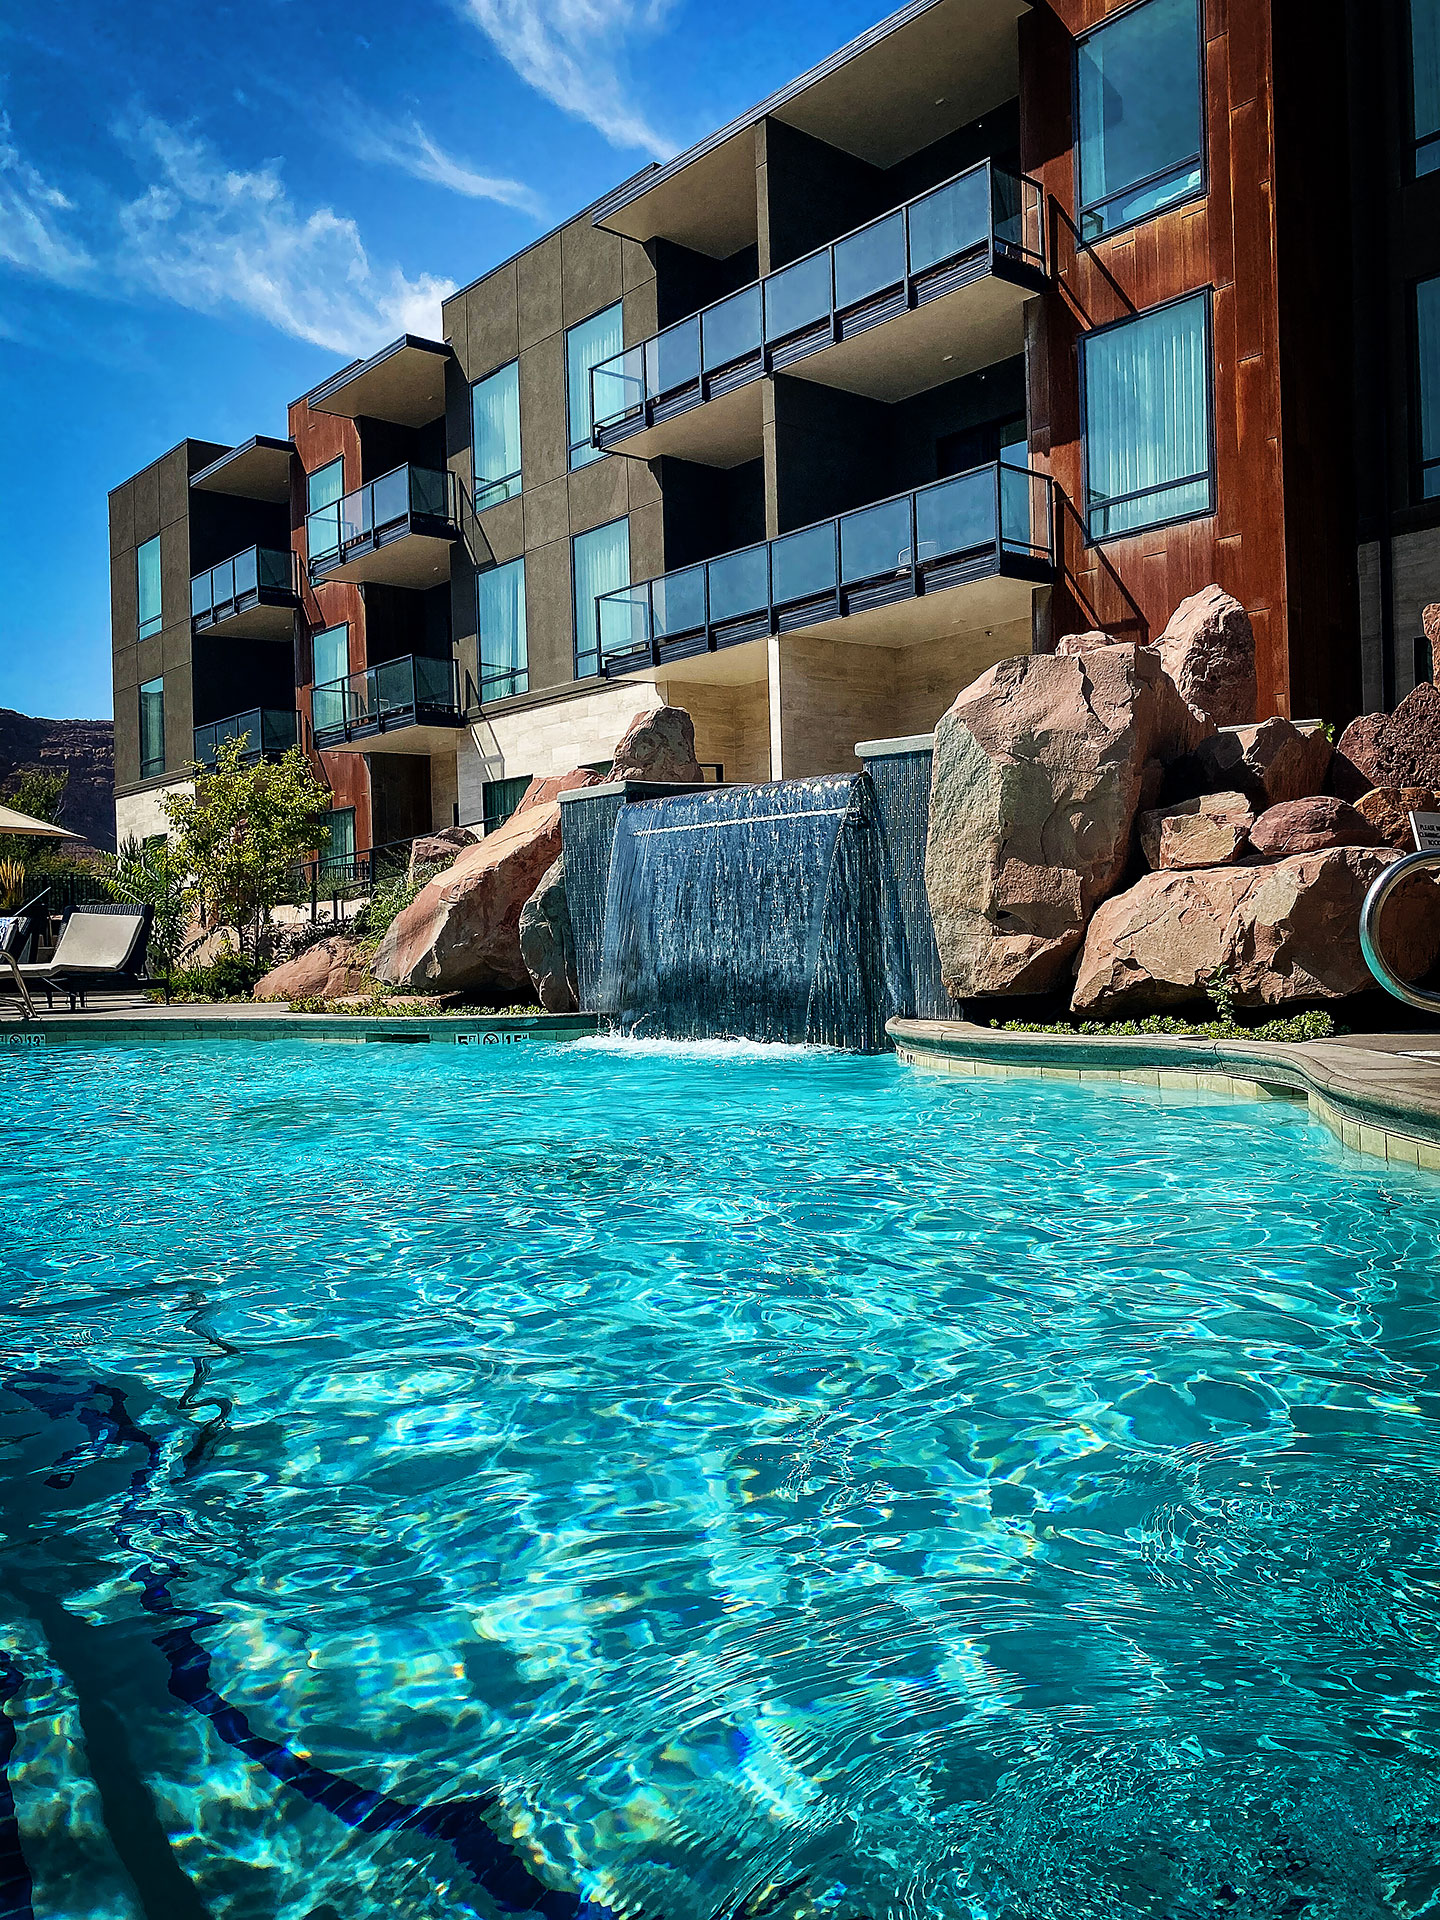 Hoodoo Moab - Hotel Review - The Pool - Travel Blog